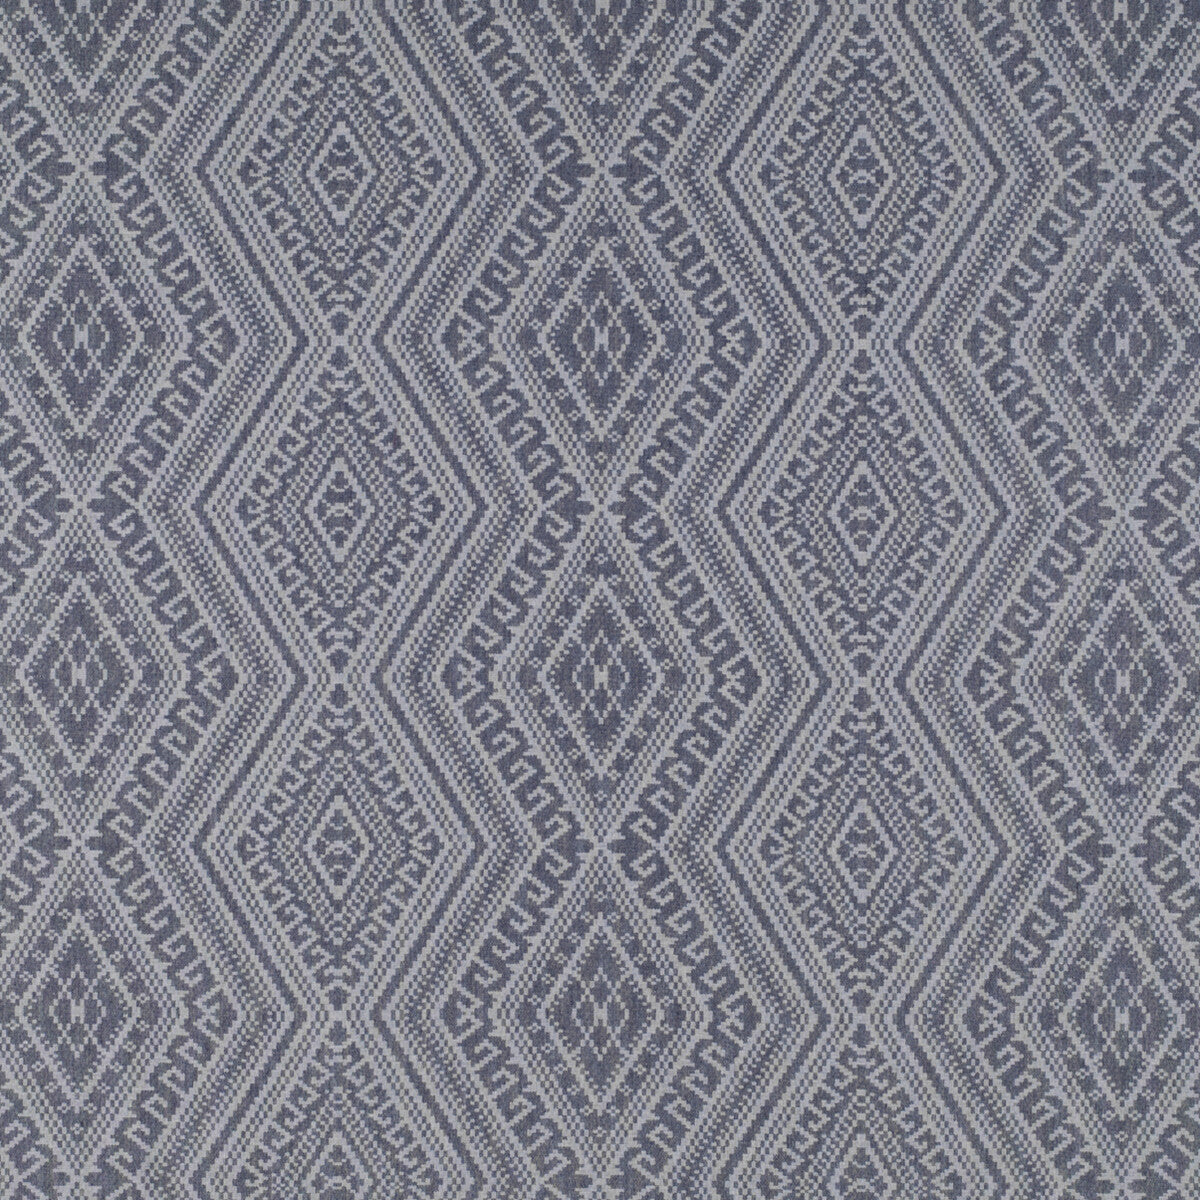 Estromboli fabric in navy color - pattern GDT5313.002.0 - by Gaston y Daniela in the Tierras collection